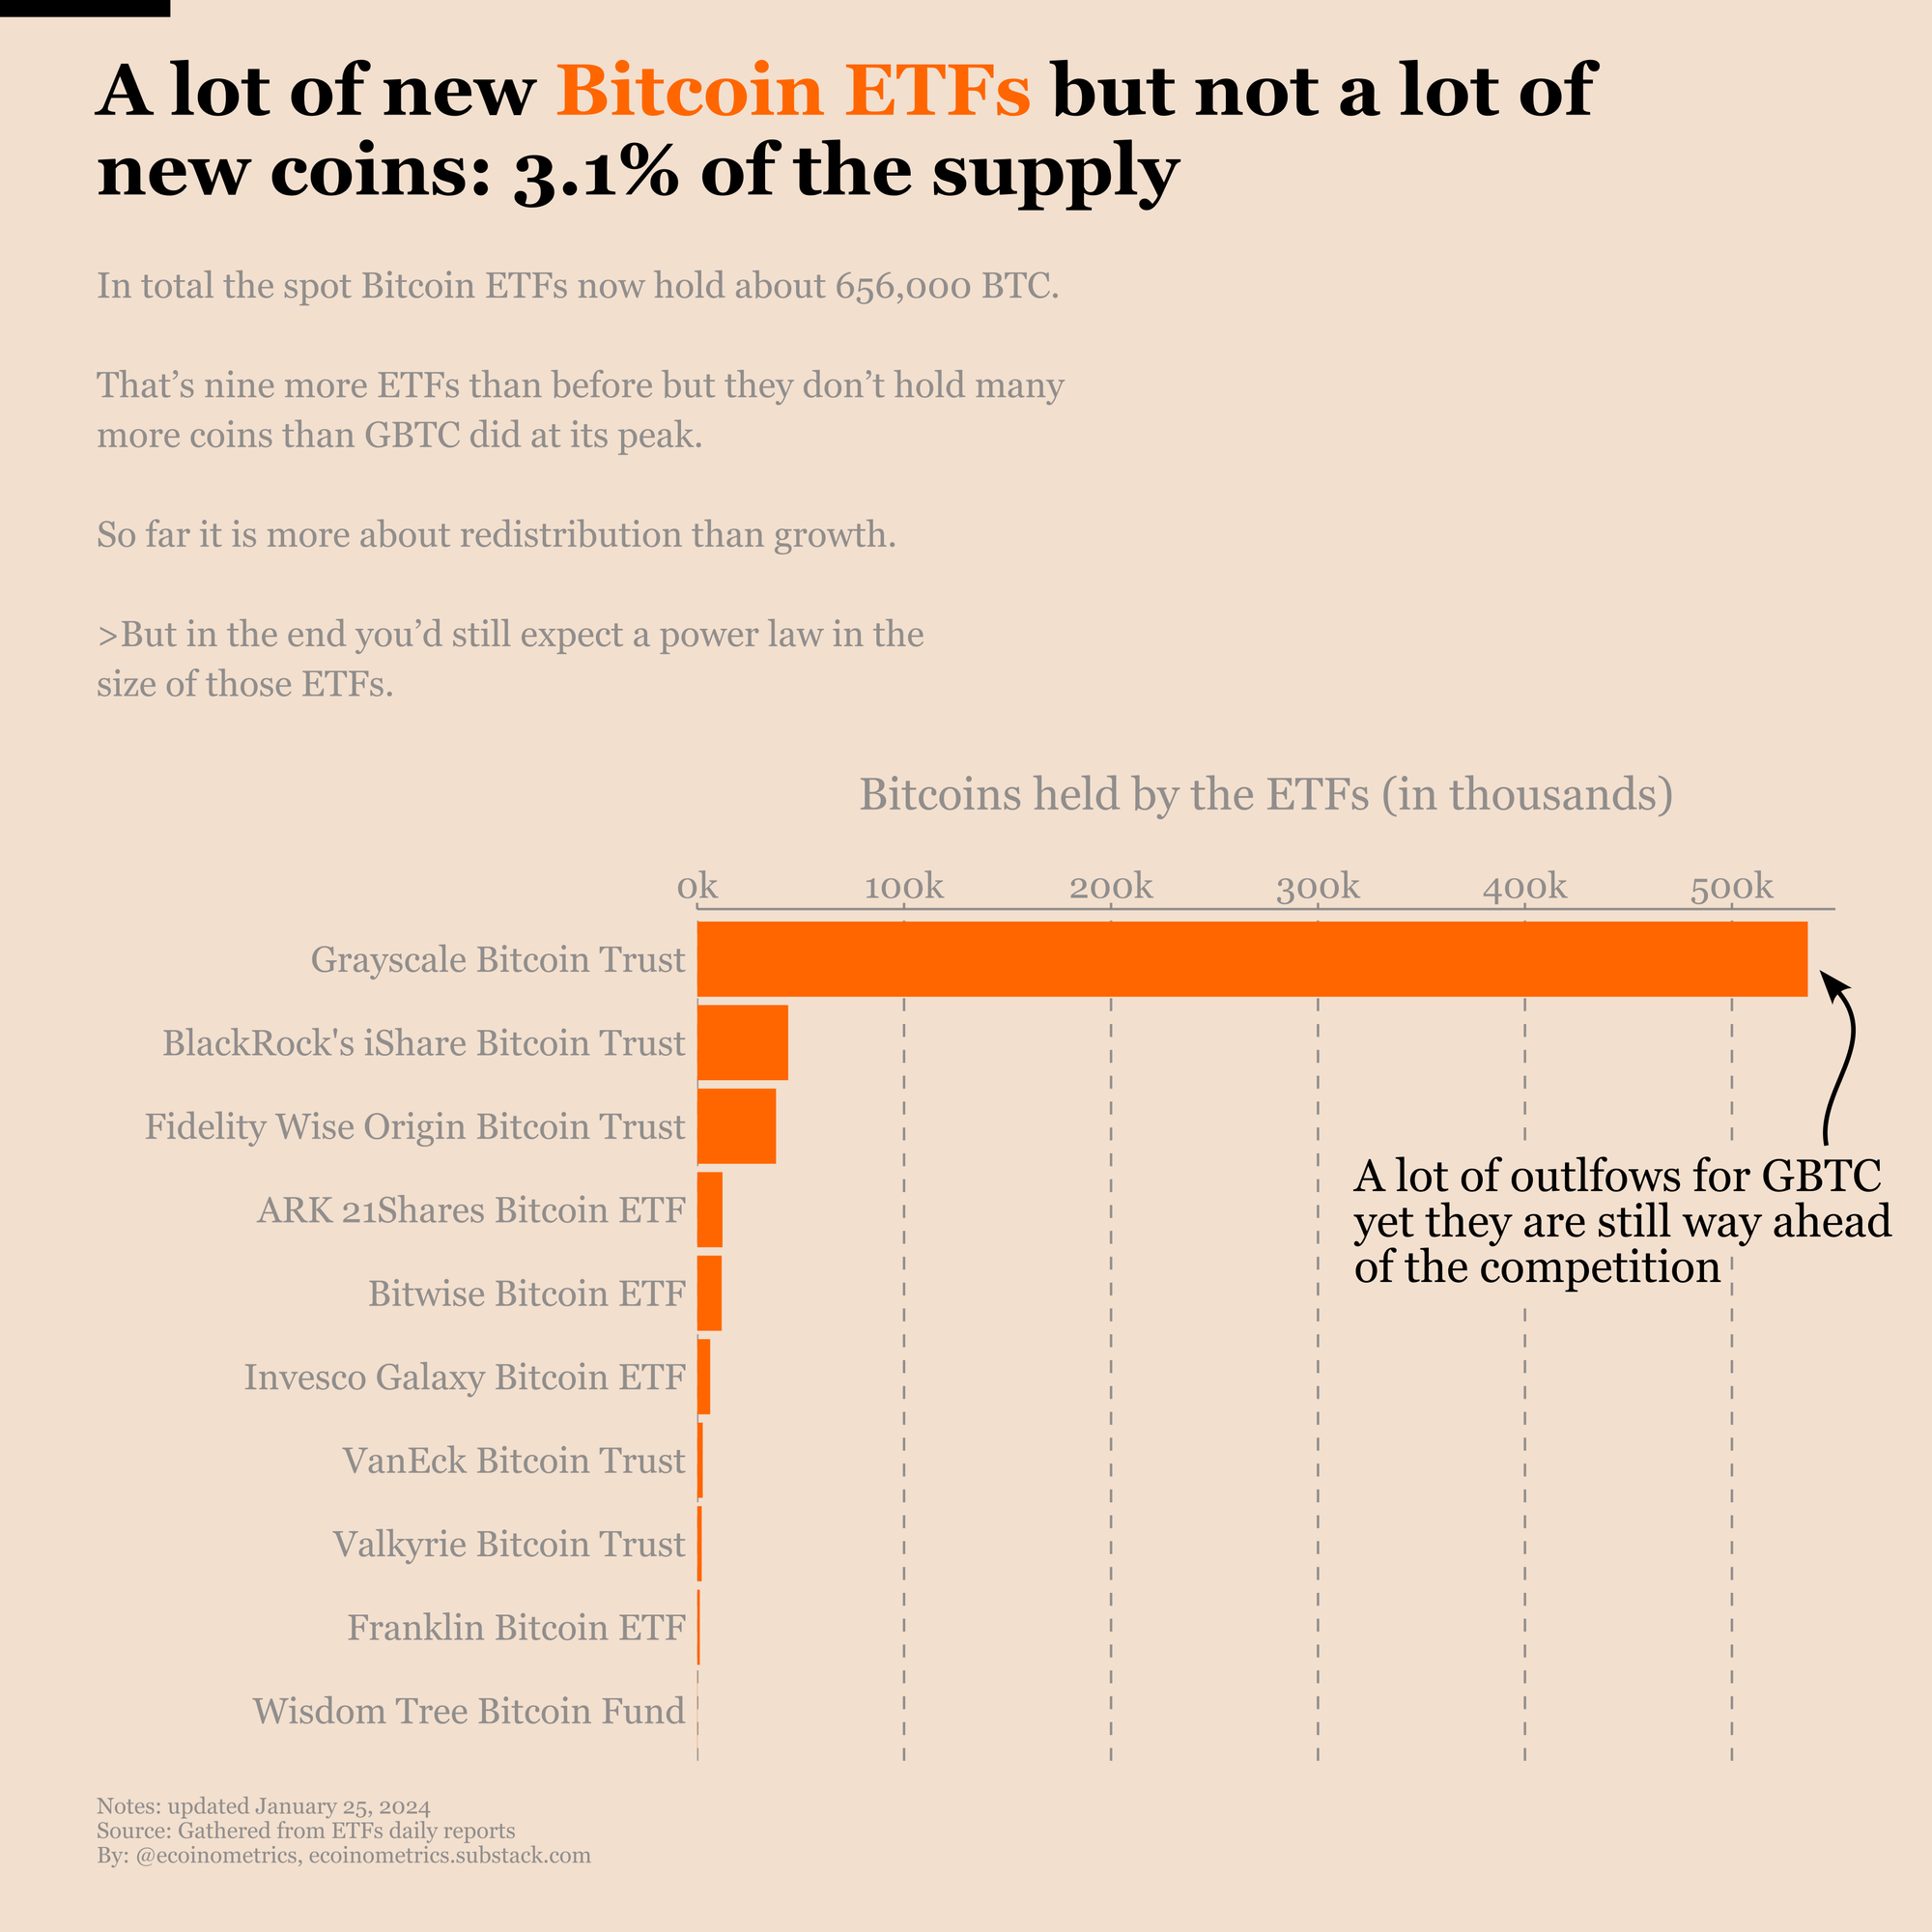 Breakdown of the amount of Bitcoins held by each of the ten Bitcoin ETFs.